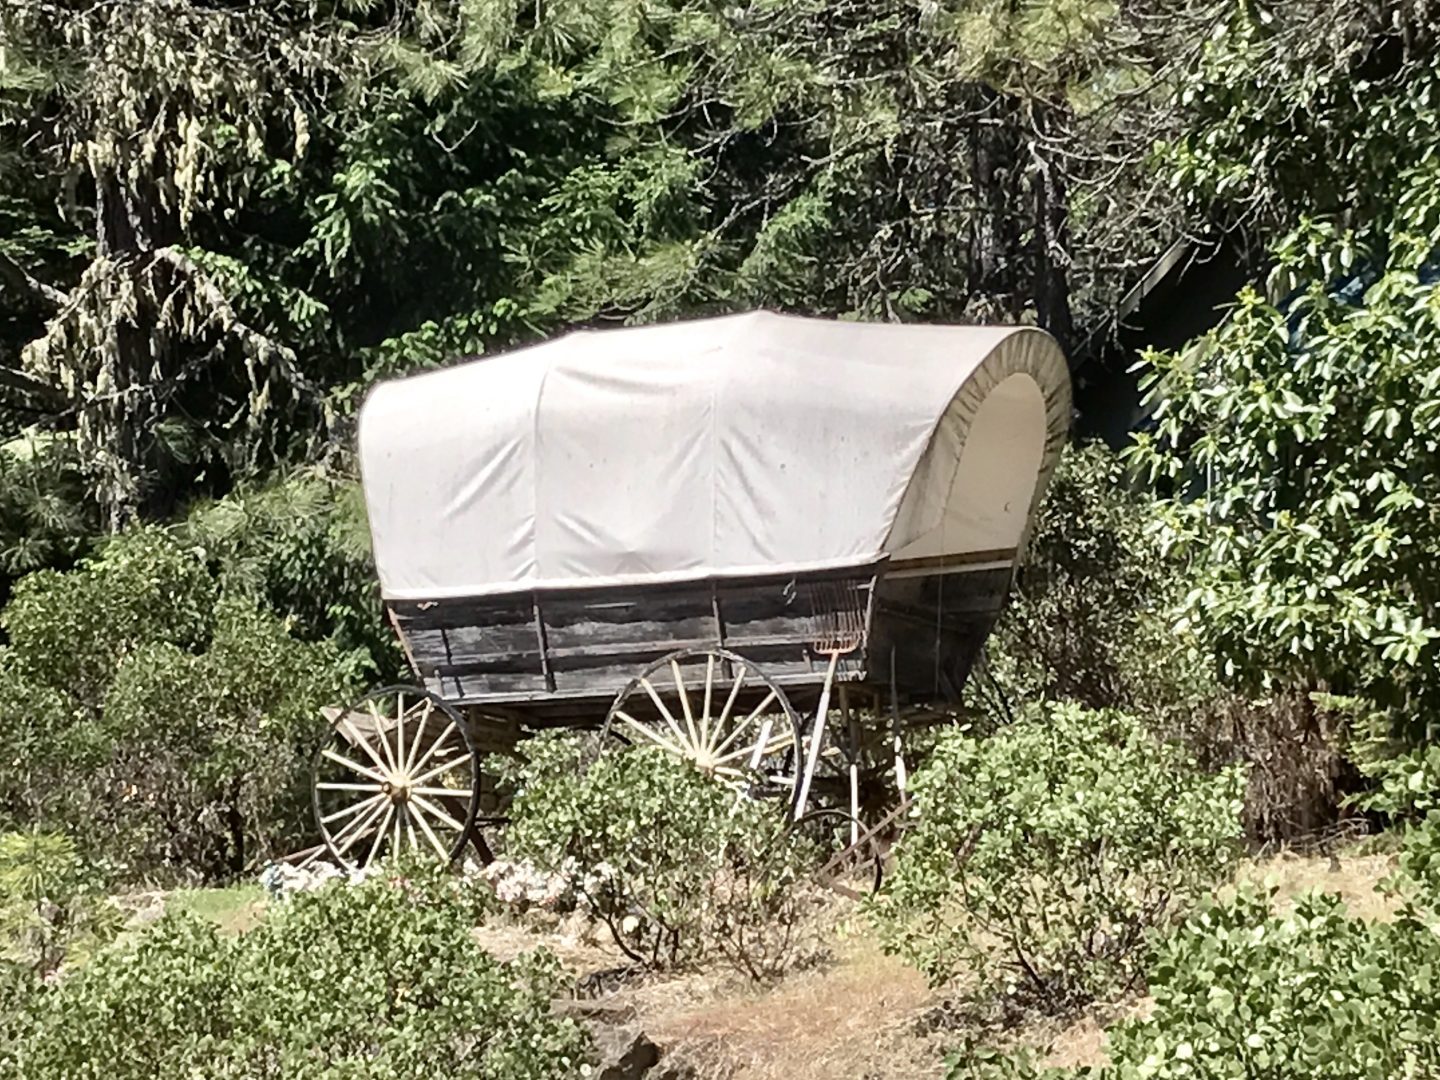 When you see a prairie wagon on a hill, you know you've reached the campground. Campers enjoy an Old West theme throughout their stay.